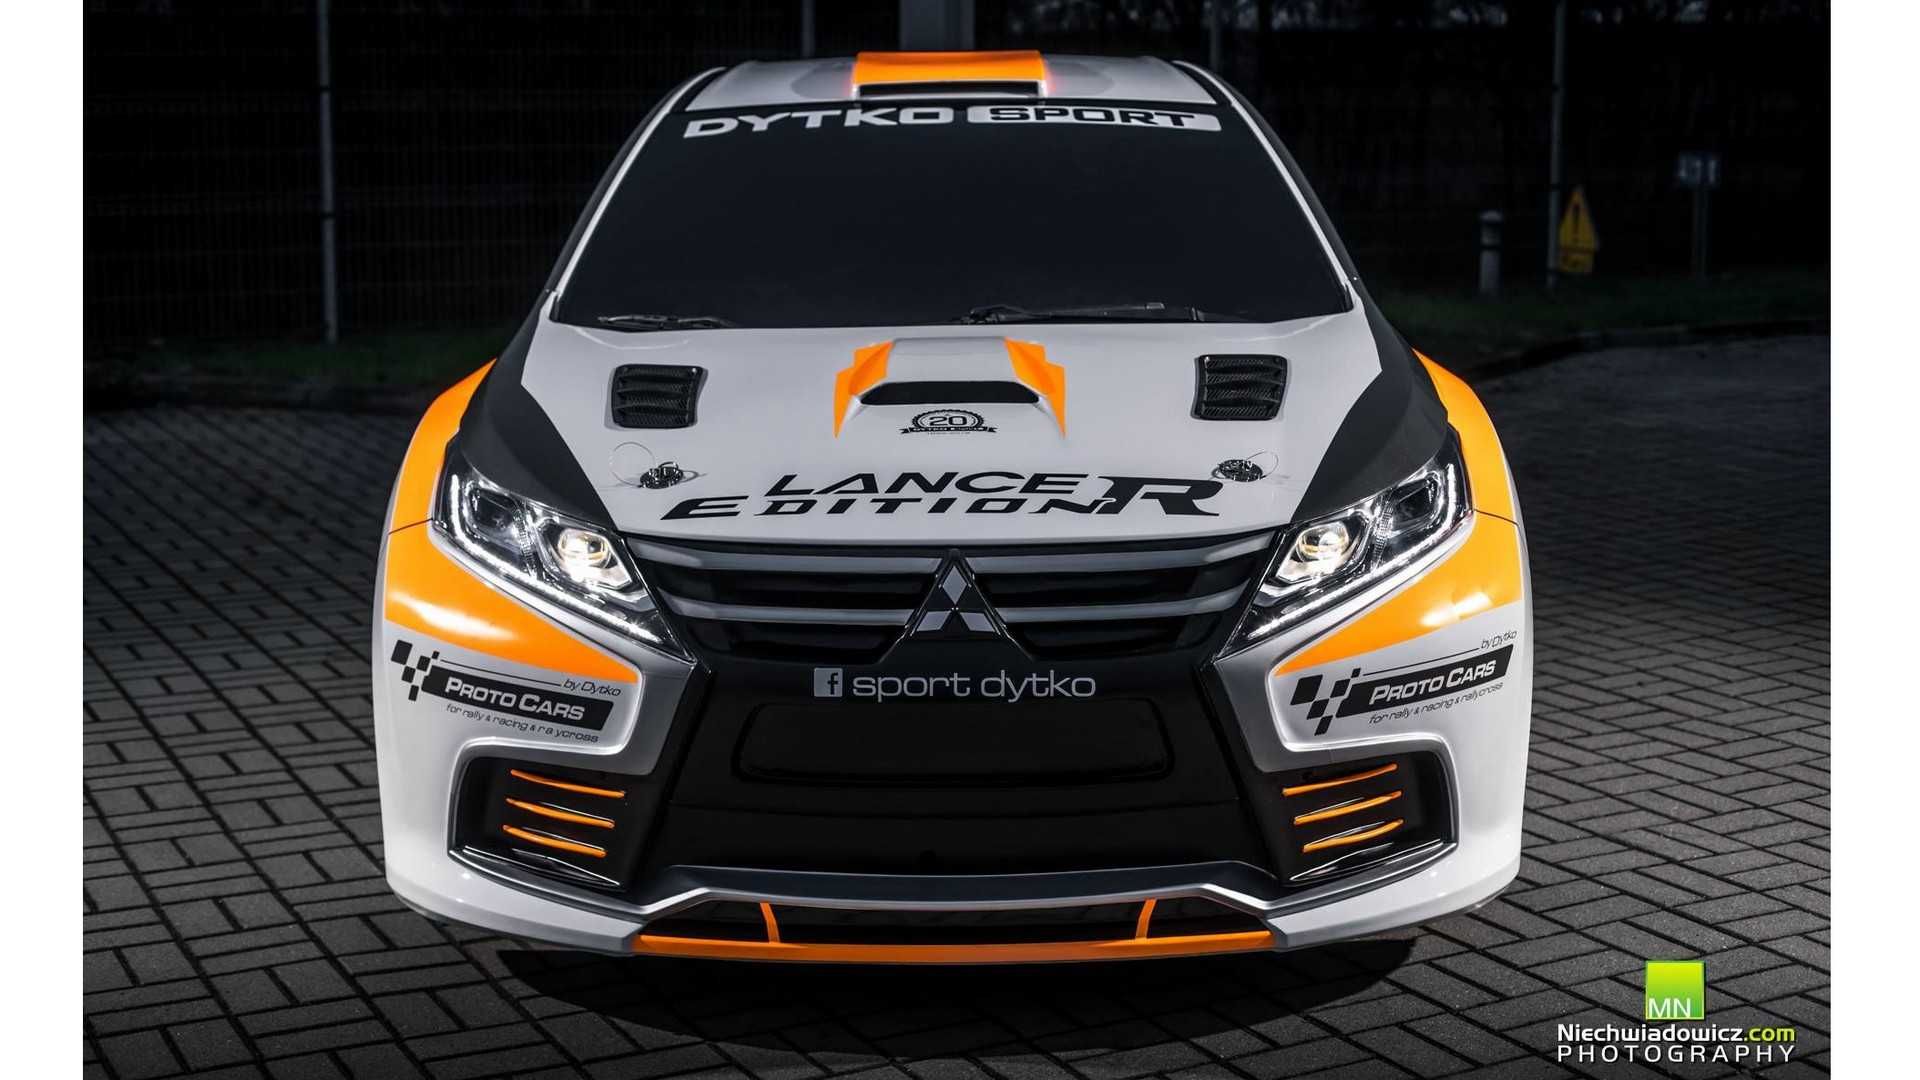 2019 Mitsubishi Lancer Edition R by Dytko and Proto Cars